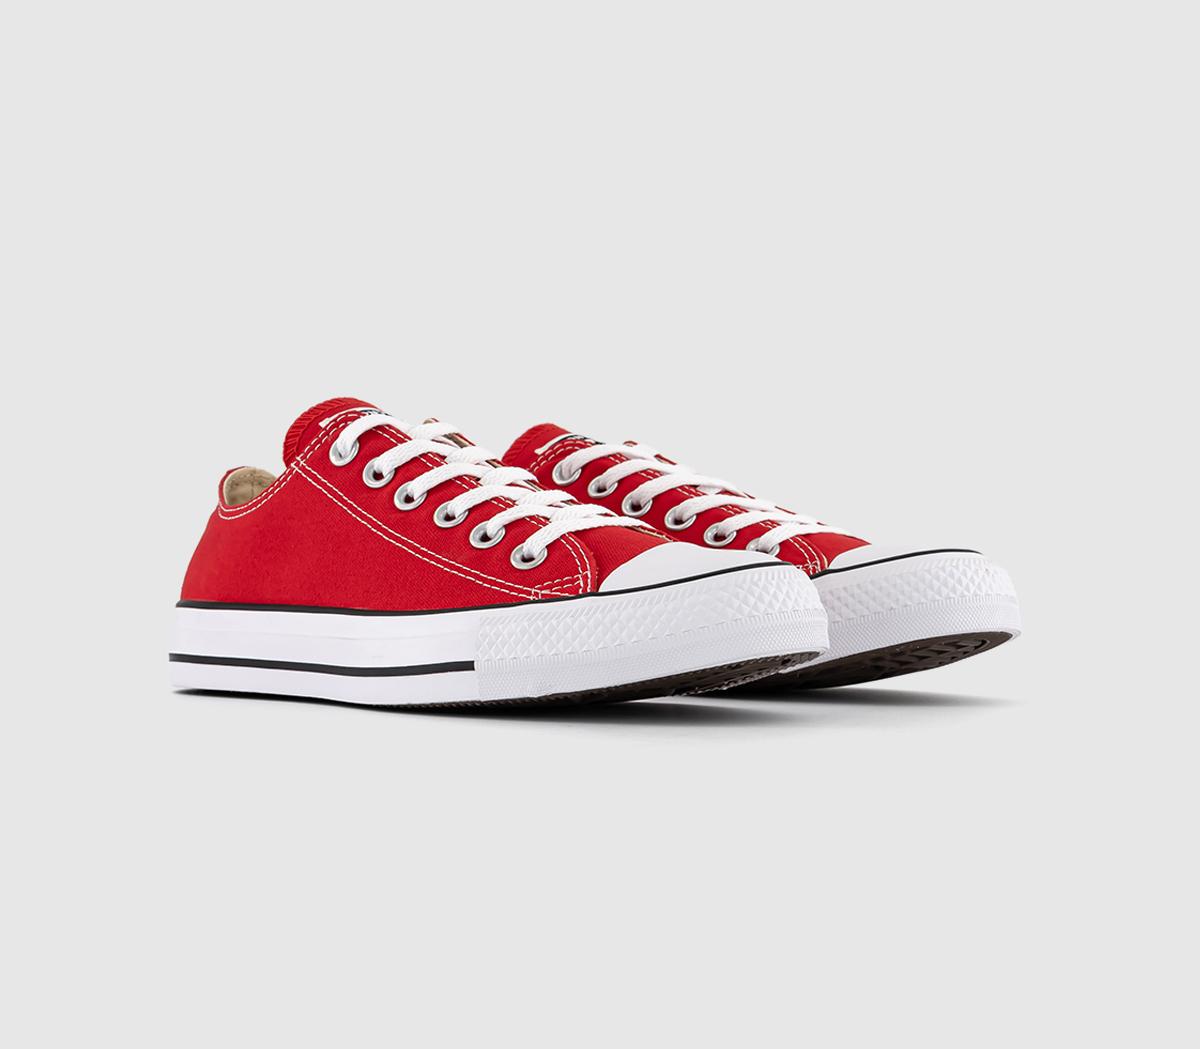 Mens Converse All Star Low Red Canvas Trainers Red/White, 7.5